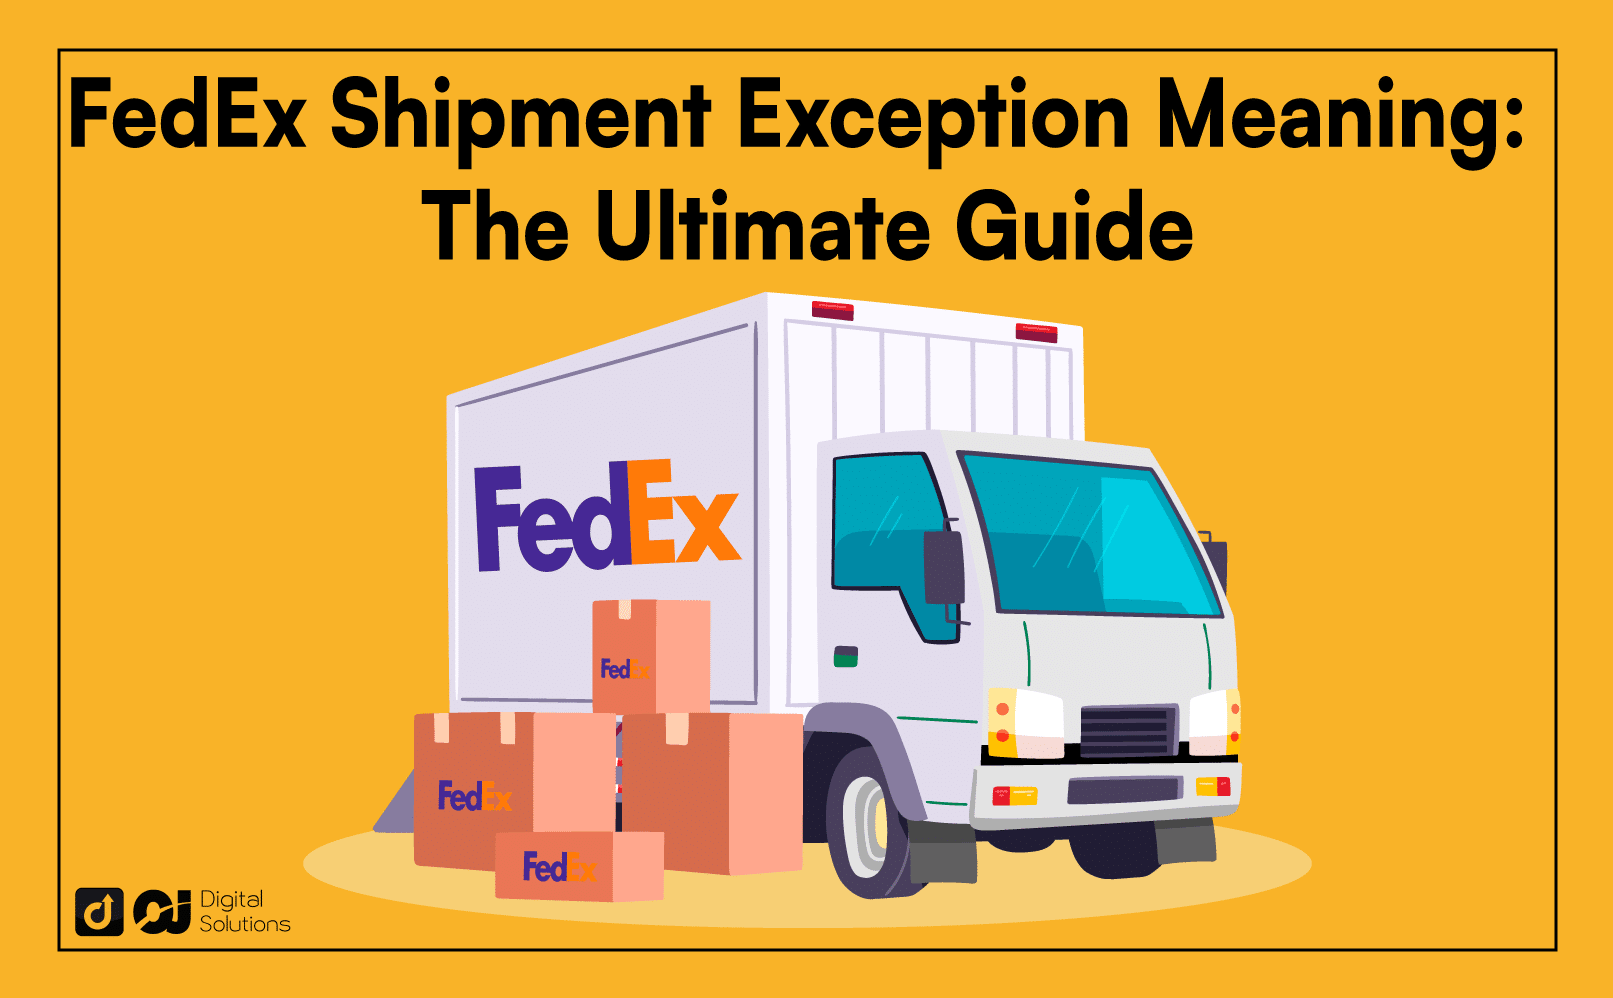 fedex shipment exception meaning